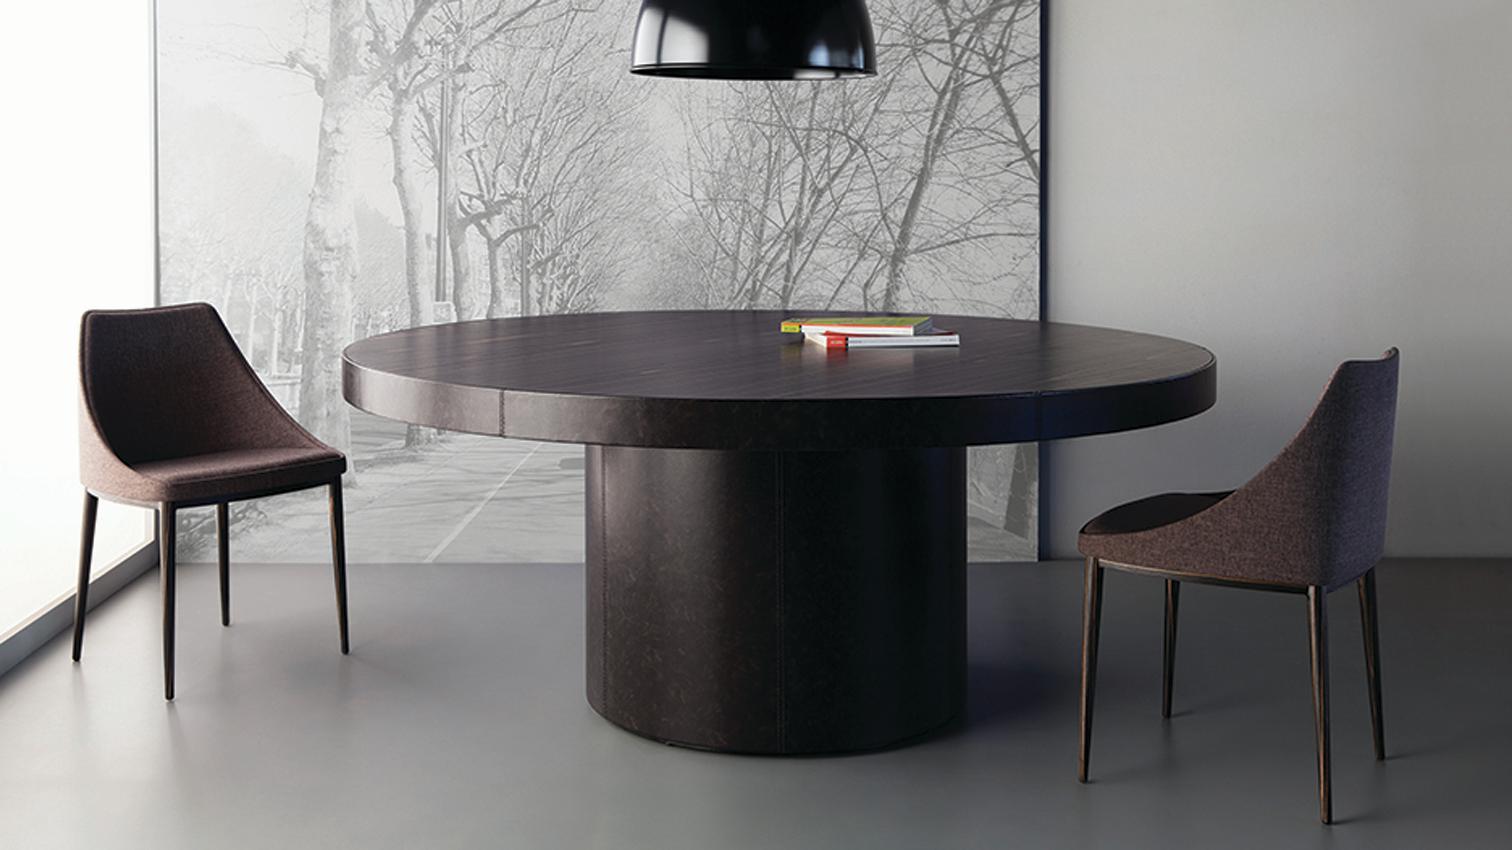 Bol Dining Table by Doimo Brasil
Dimensions: D 120 x H 75 cm 
Materials: Veneer.

Also available in D 140, D 160, D 180, D 200. Please contact us.

With the intention of providing good taste and personality, Doimo deciphers trends and follows the